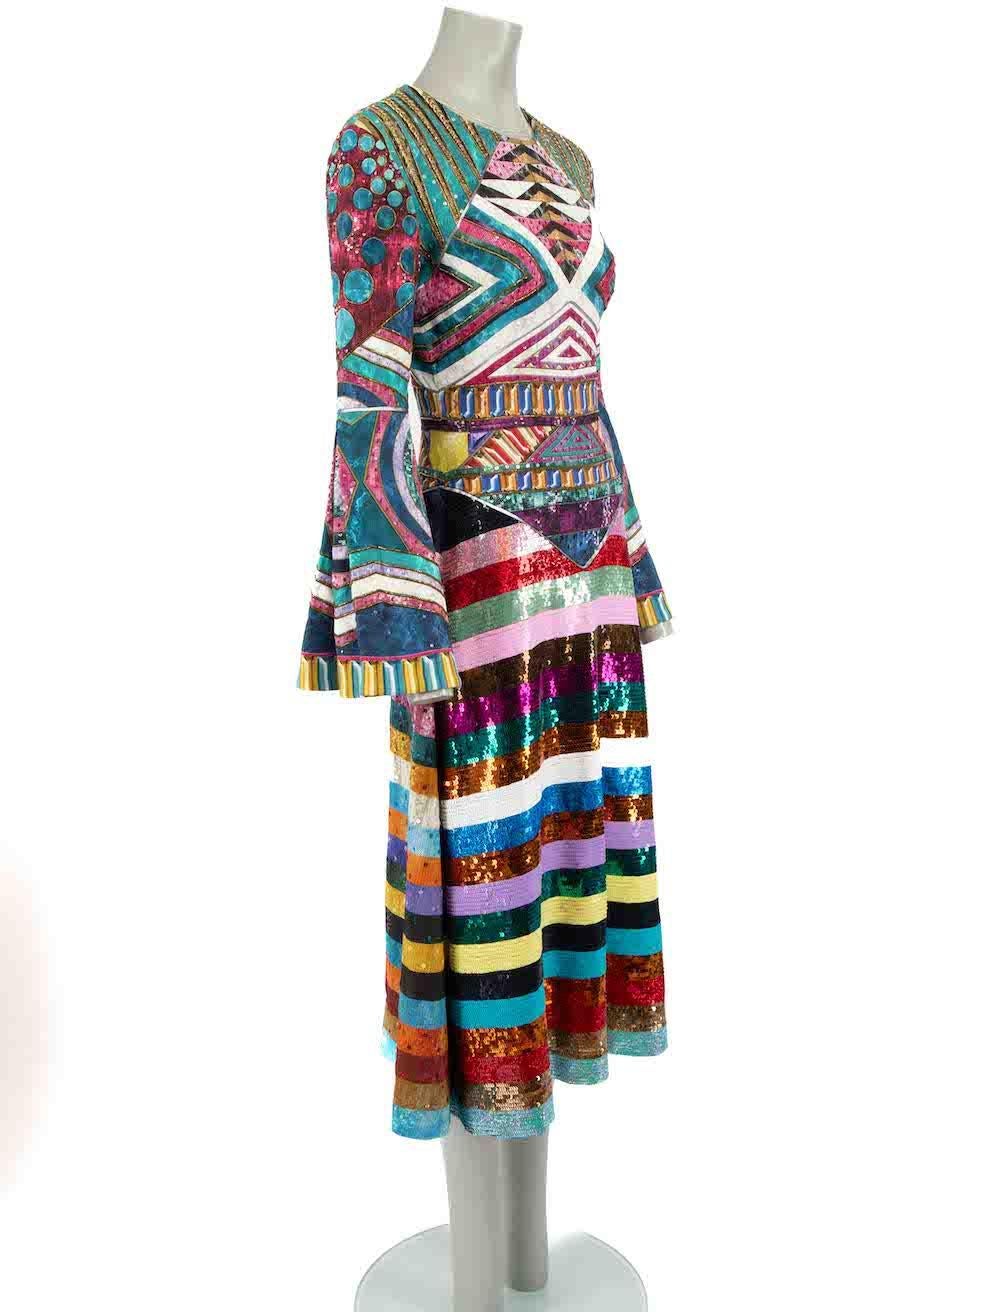 CONDITION is Very good. Minimal wear to dress is evident. Minimal wear to the embellishment with some missing beads at both sleeves on this used Mary Katrantzou designer resale item.
 
 Details
 Multicolour
 Viscose
 Dress
 Patterned
 Sequin and